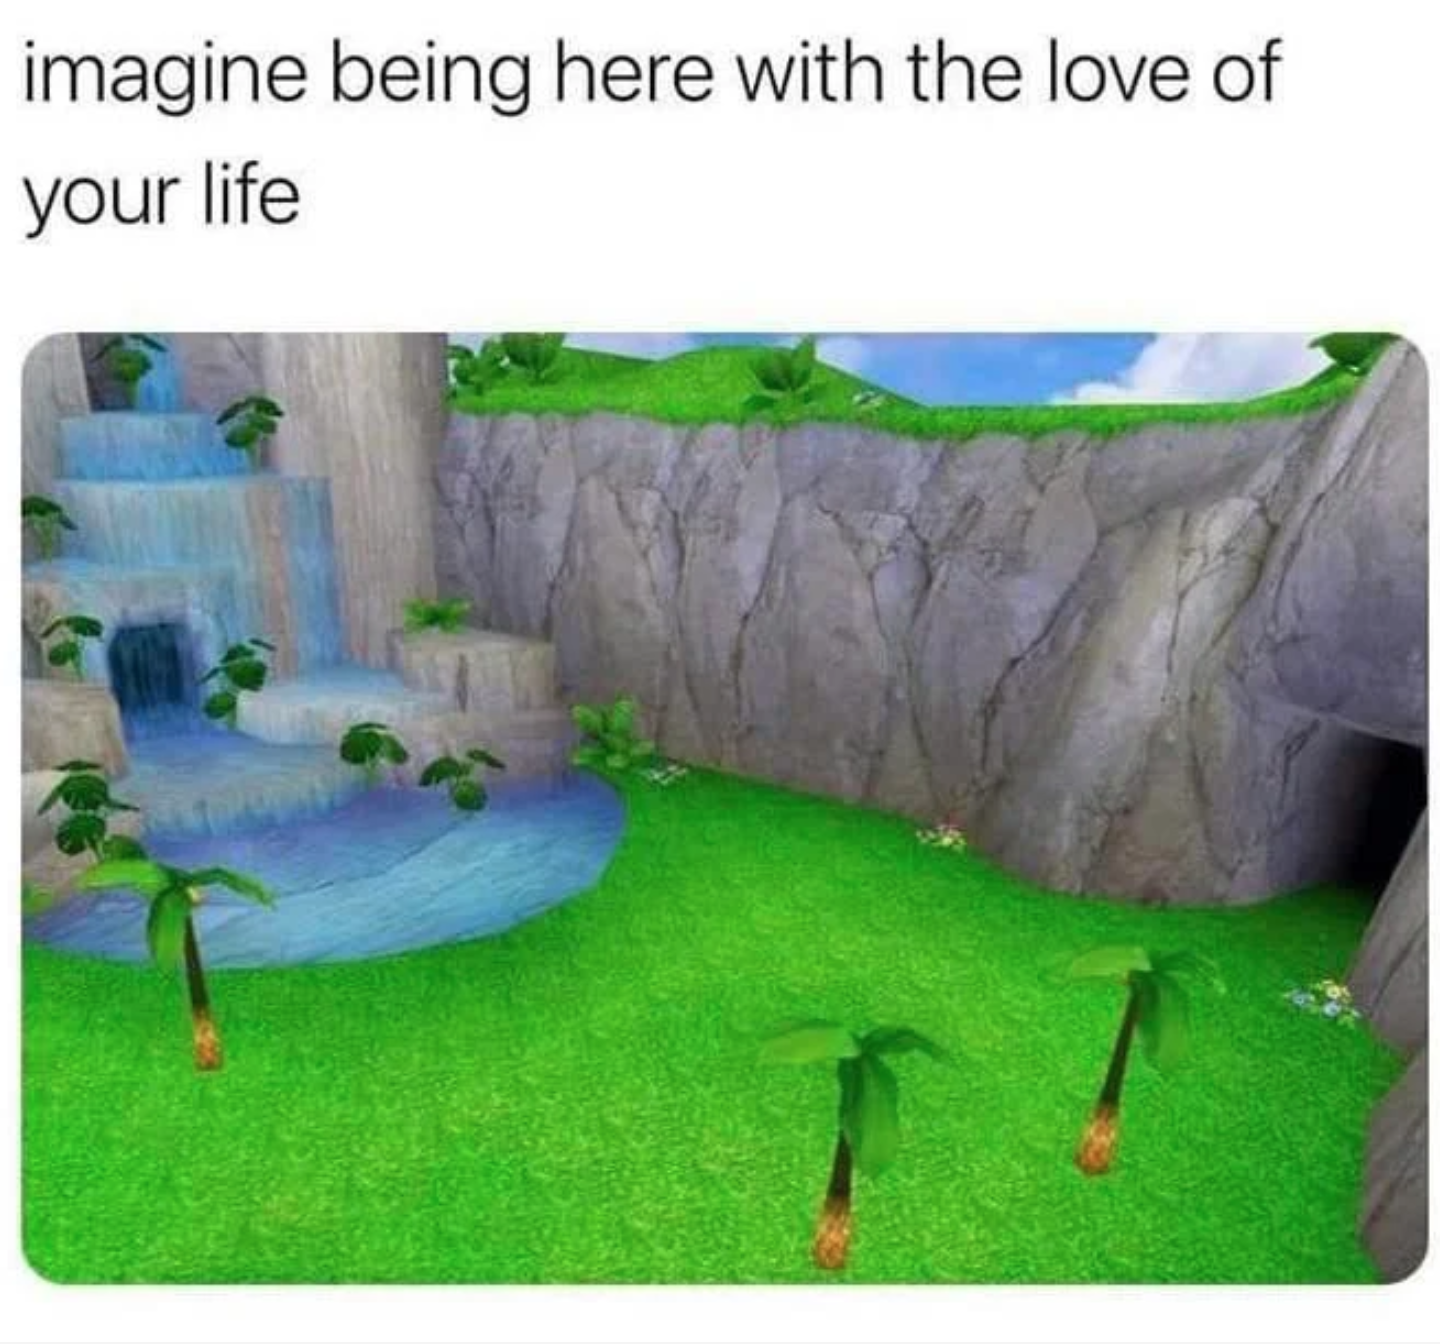 funny gaming memes - grass - imagine being here with the love of your life